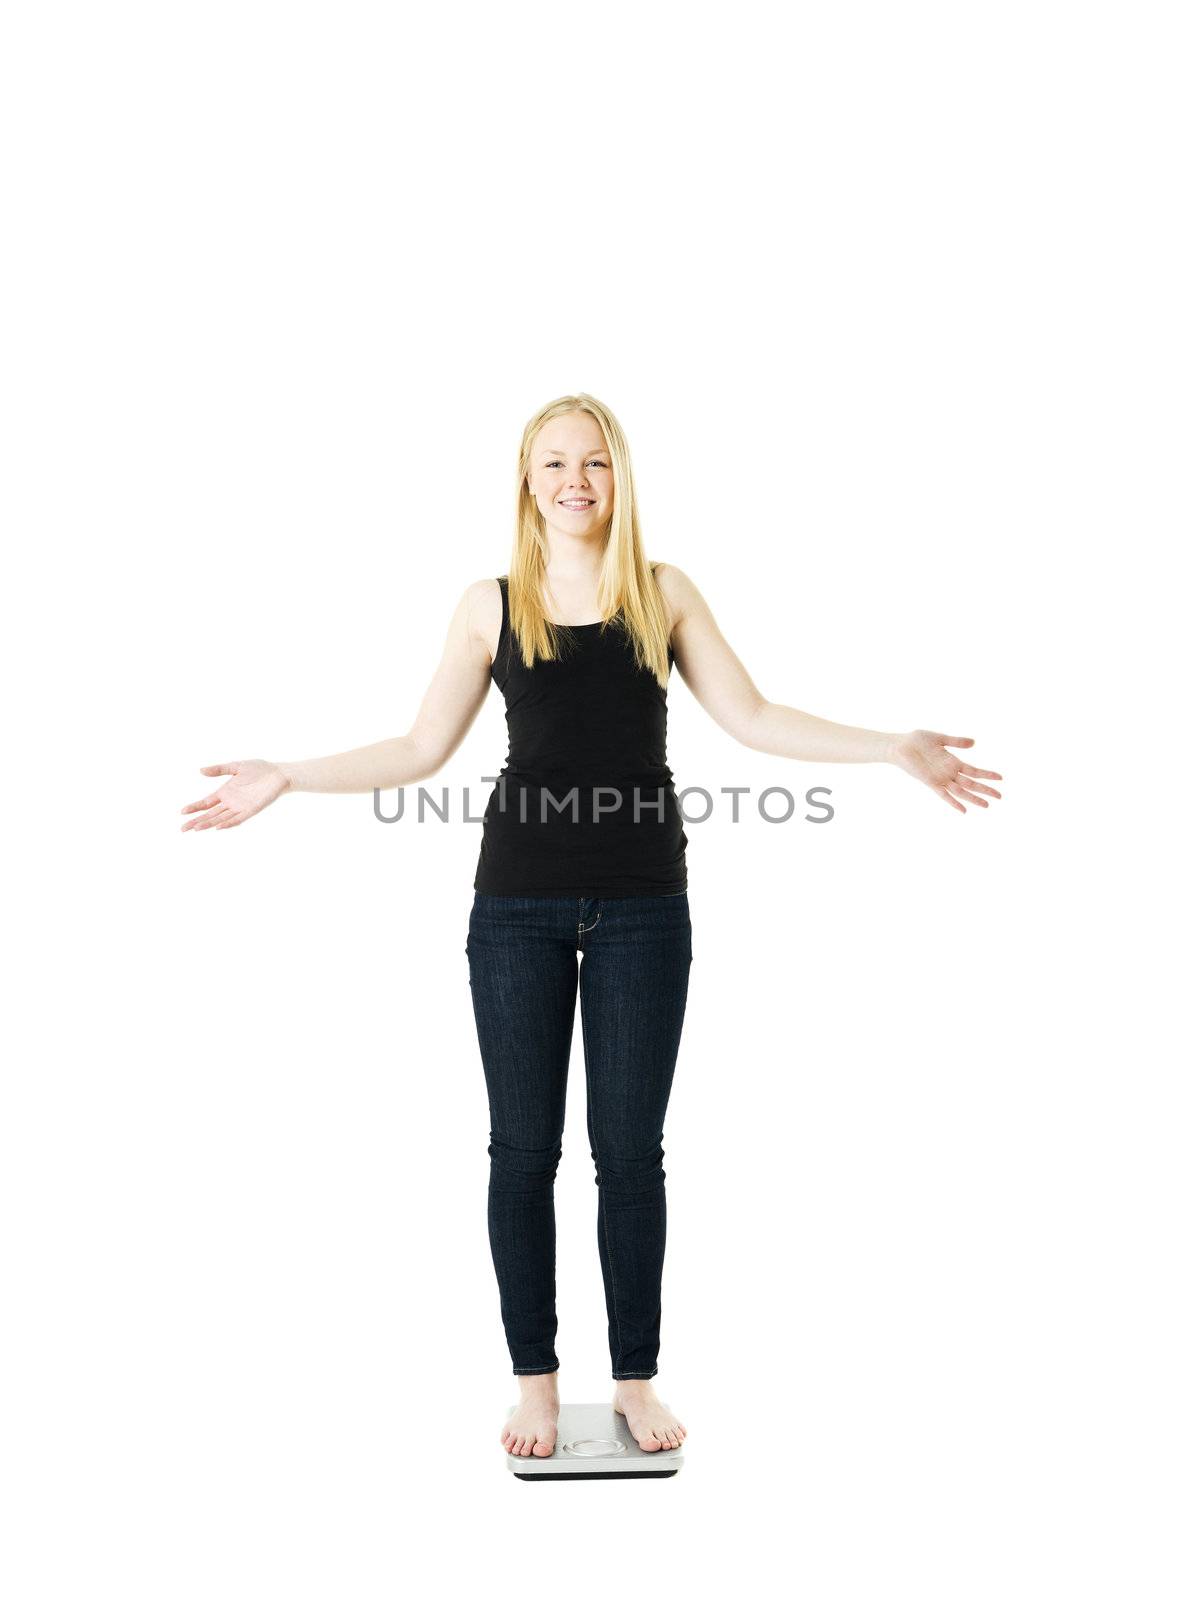 Young Girl on weight scale isolated on white background